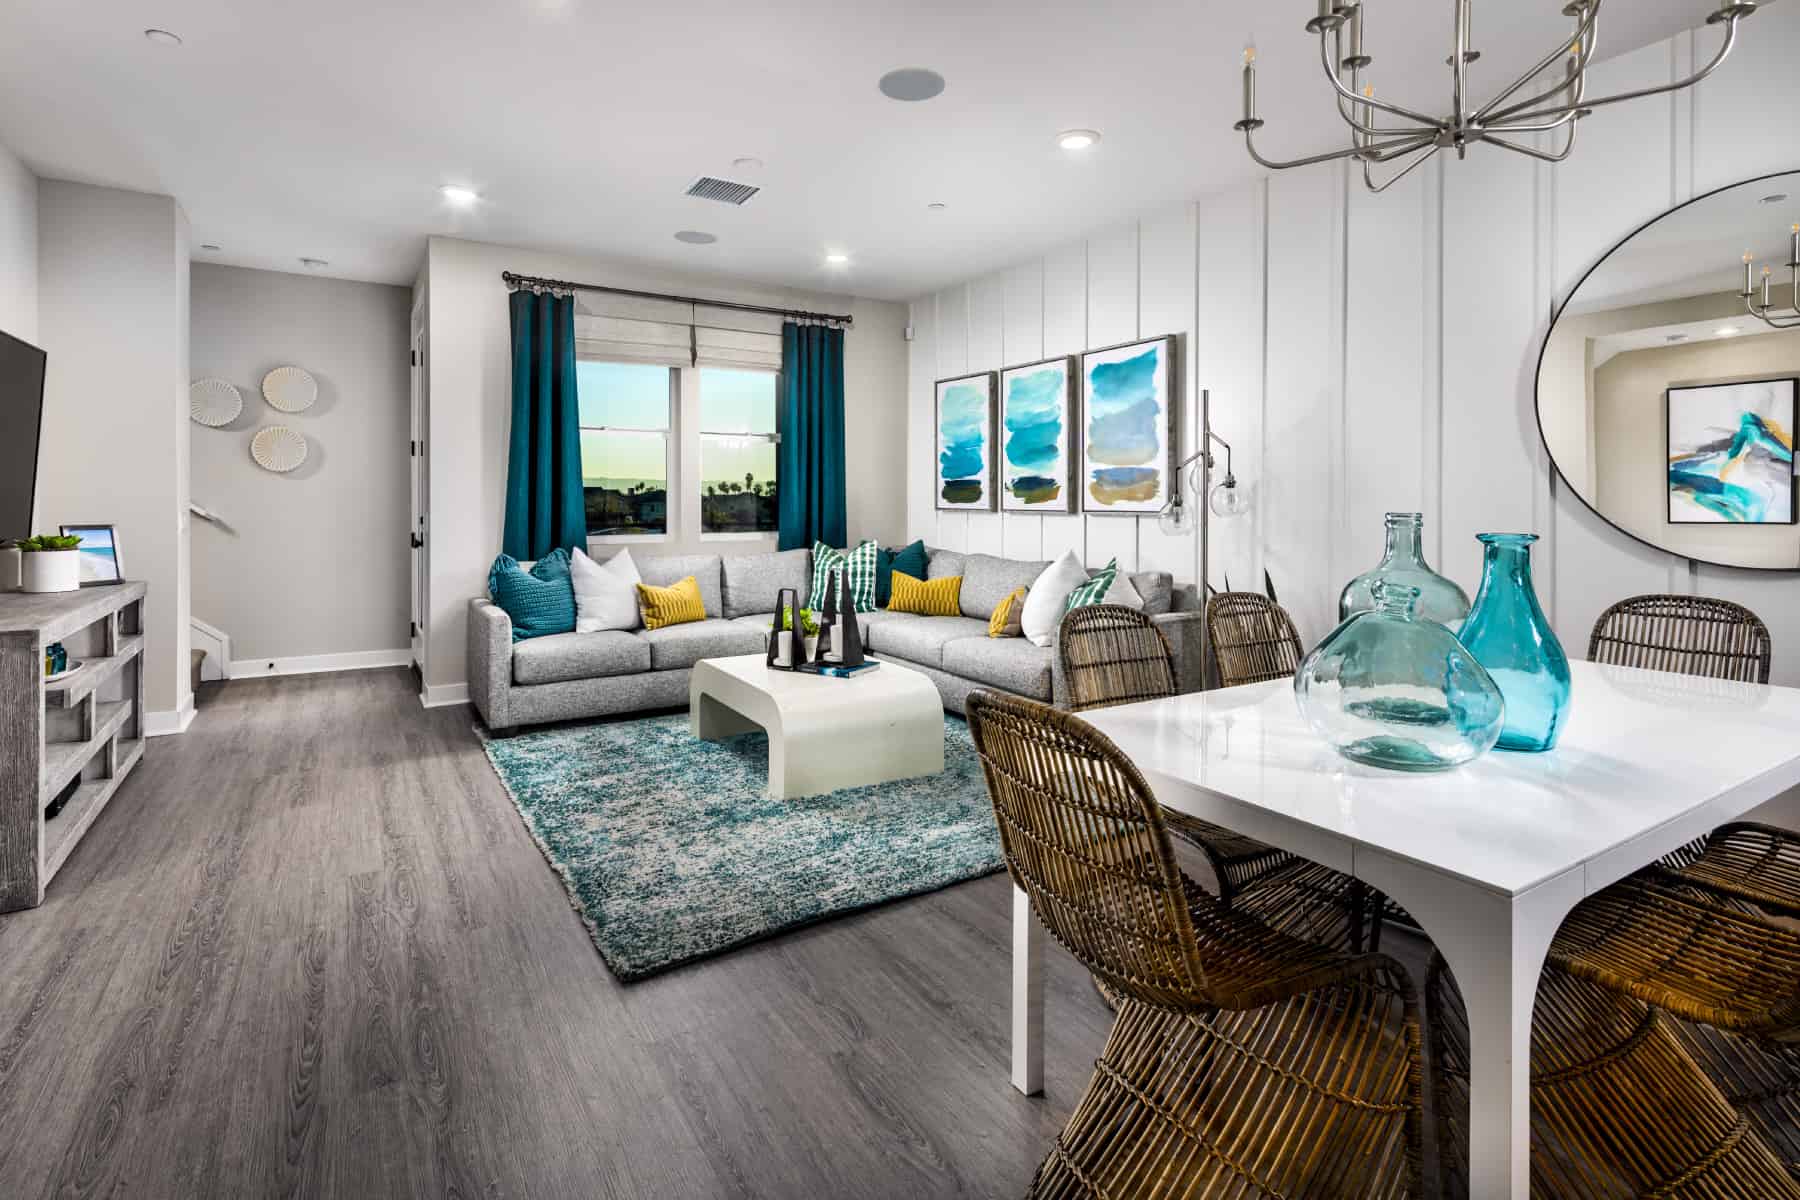 Dining/Living Room in Plan 4 at Moneta Pointe by Melia Homes in Gardena, CA